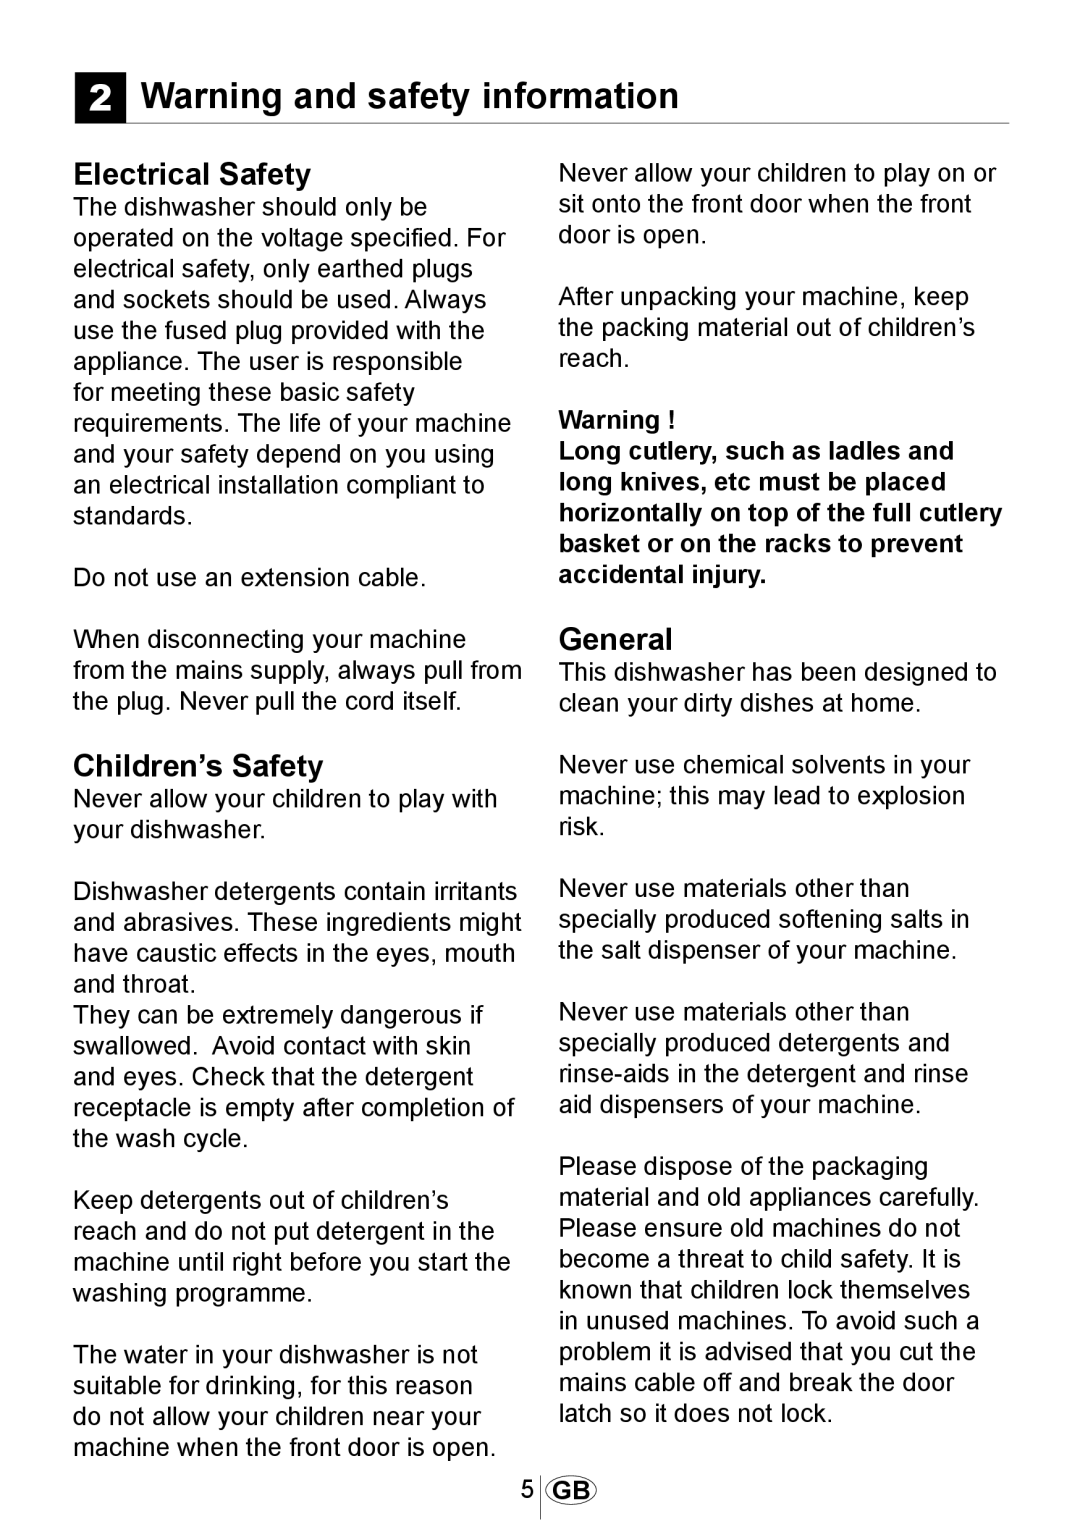 Beko DSFN 1532 manual 2Warning and safety information, Electrical Safety, Children’s Safety, General 